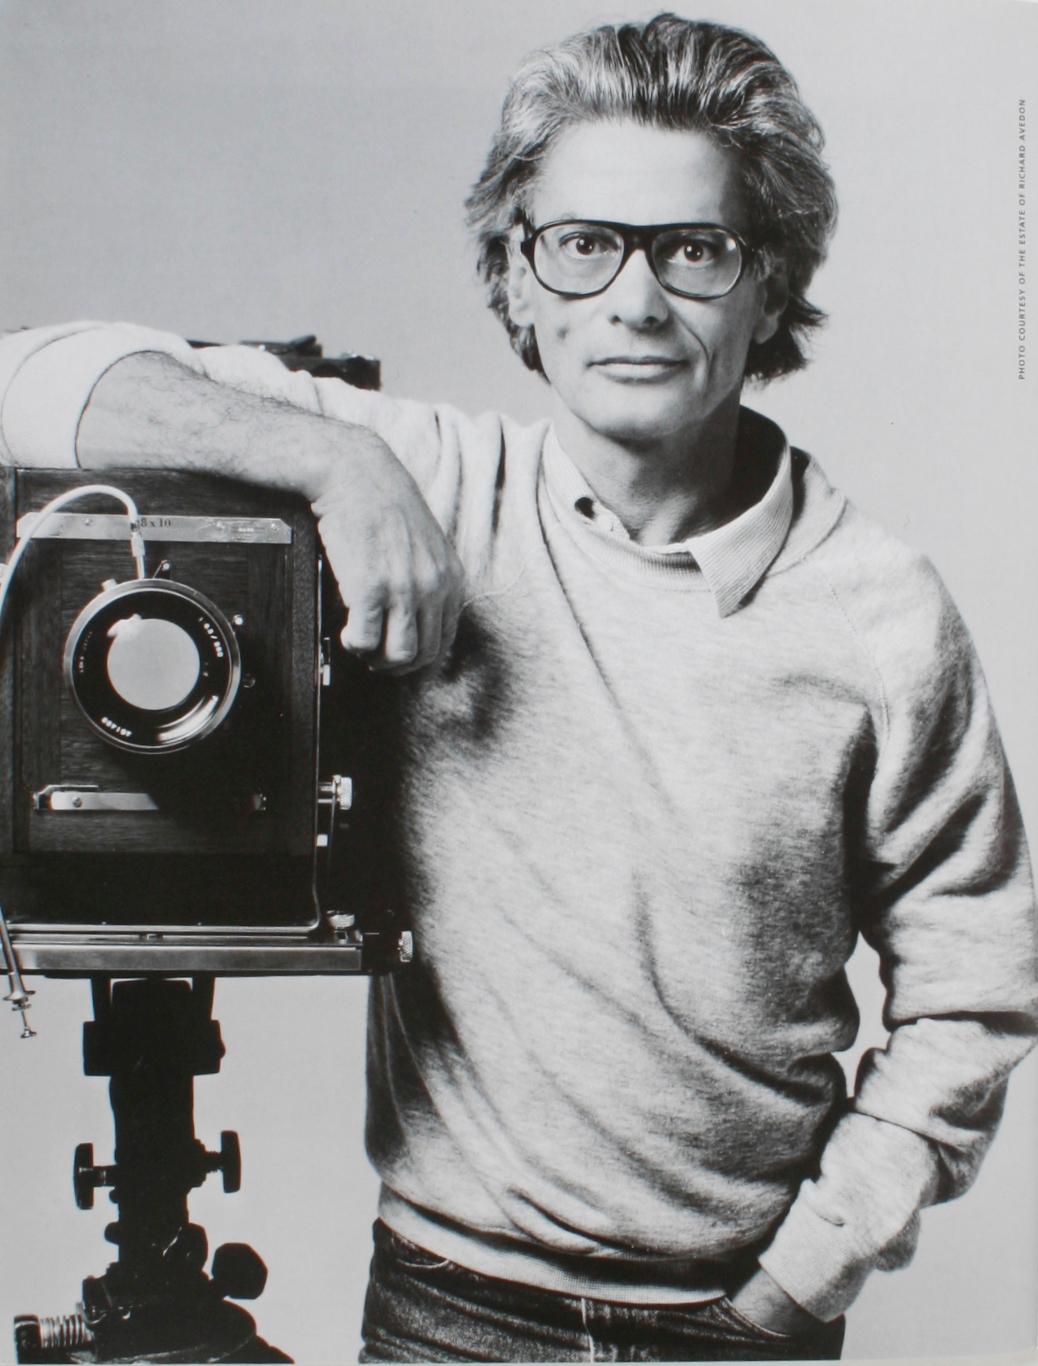 Sotheby's: Property from the Estate of Richard Avedon, Sale #8091, October 2005 1